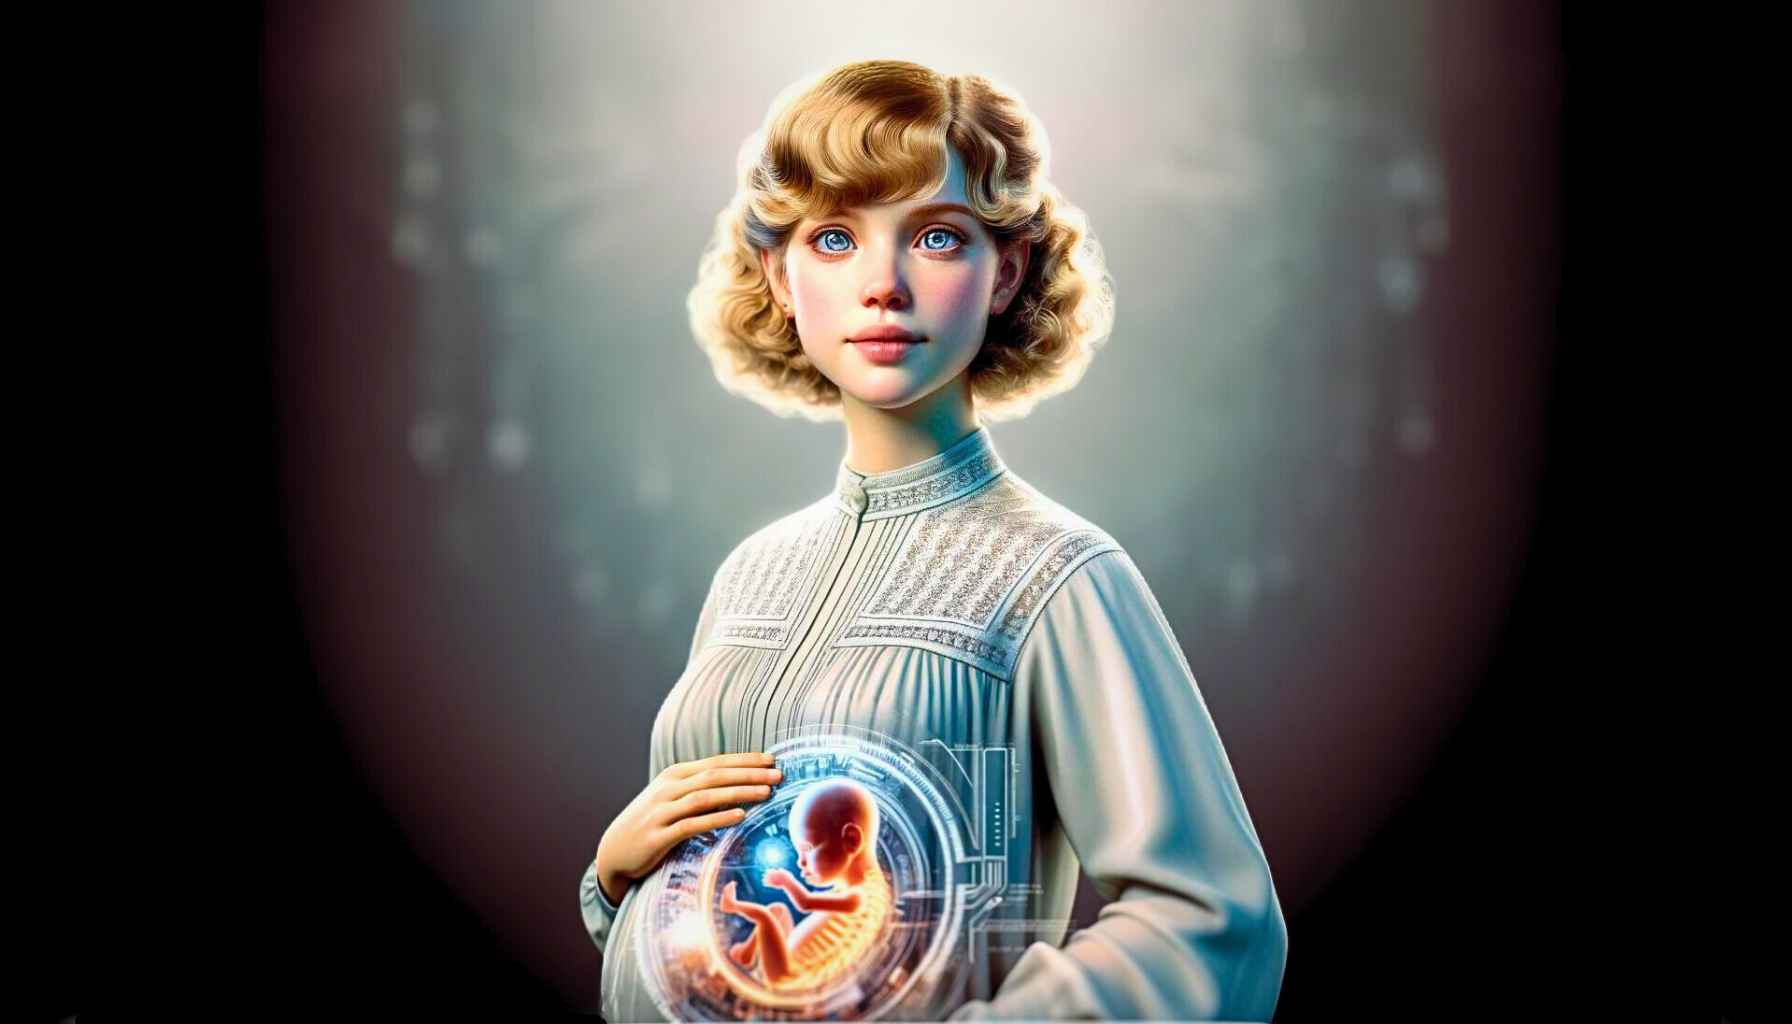 A pretty young blond woman looks directly at the viewer, her hands gently holding her pregnant belly. Her abdomen is transparent, and a futuristic womb with a fetus inside is visible.